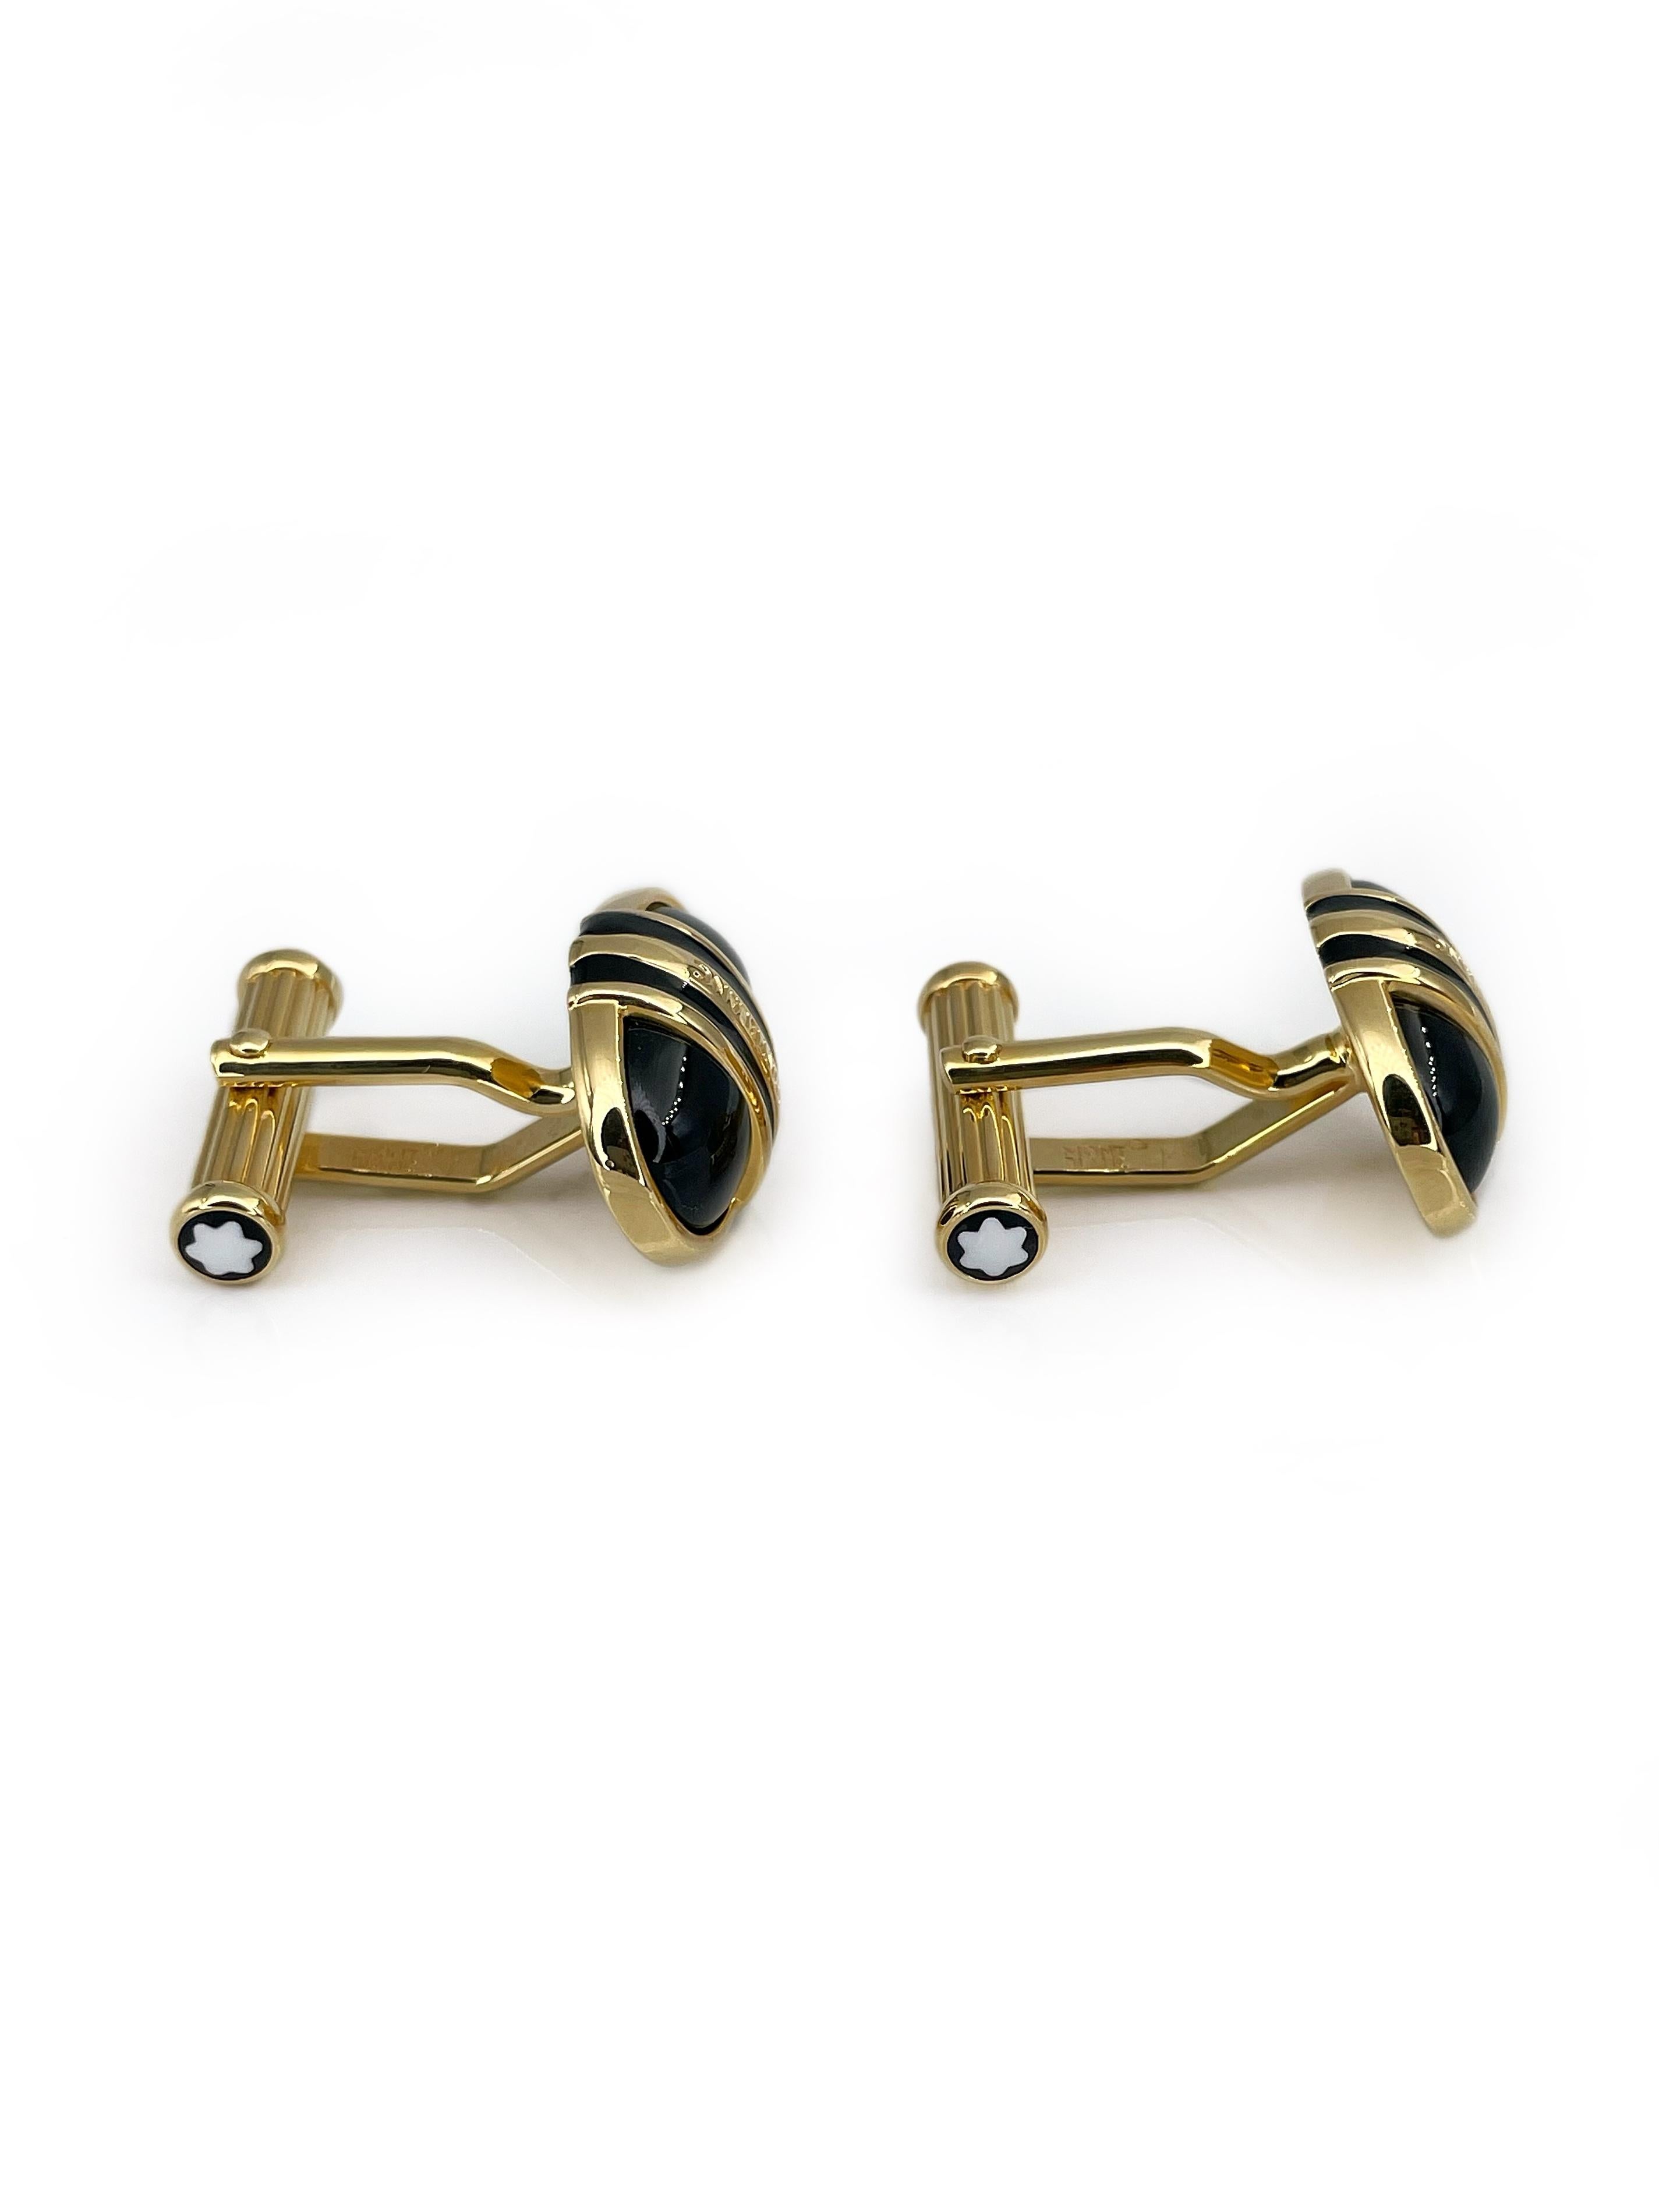 This is a classic pair of oval cufflinks designed by Montblanc in 2000’s. The piece is gold plated. It features faux black onyx labelled with brand signature. The cufflinks fasten with a T-bar. 

Signed: “Mont Blanc. Germany”

Perfect gift for a